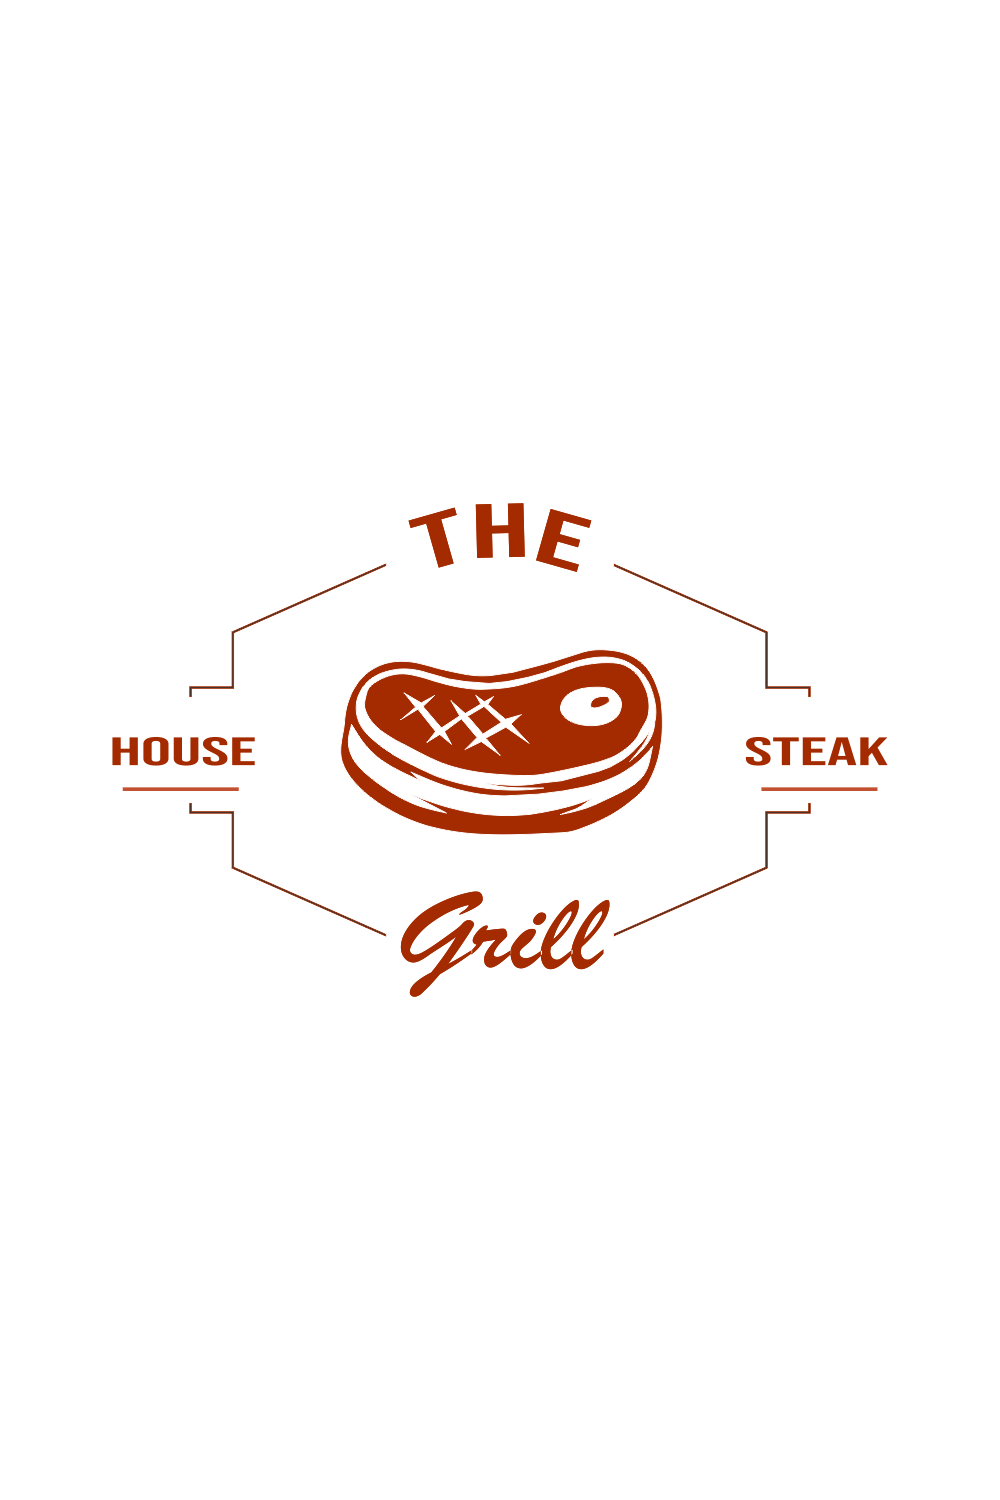 Steak comes from beef steak, which means a piece of meat logo pinterest preview image.